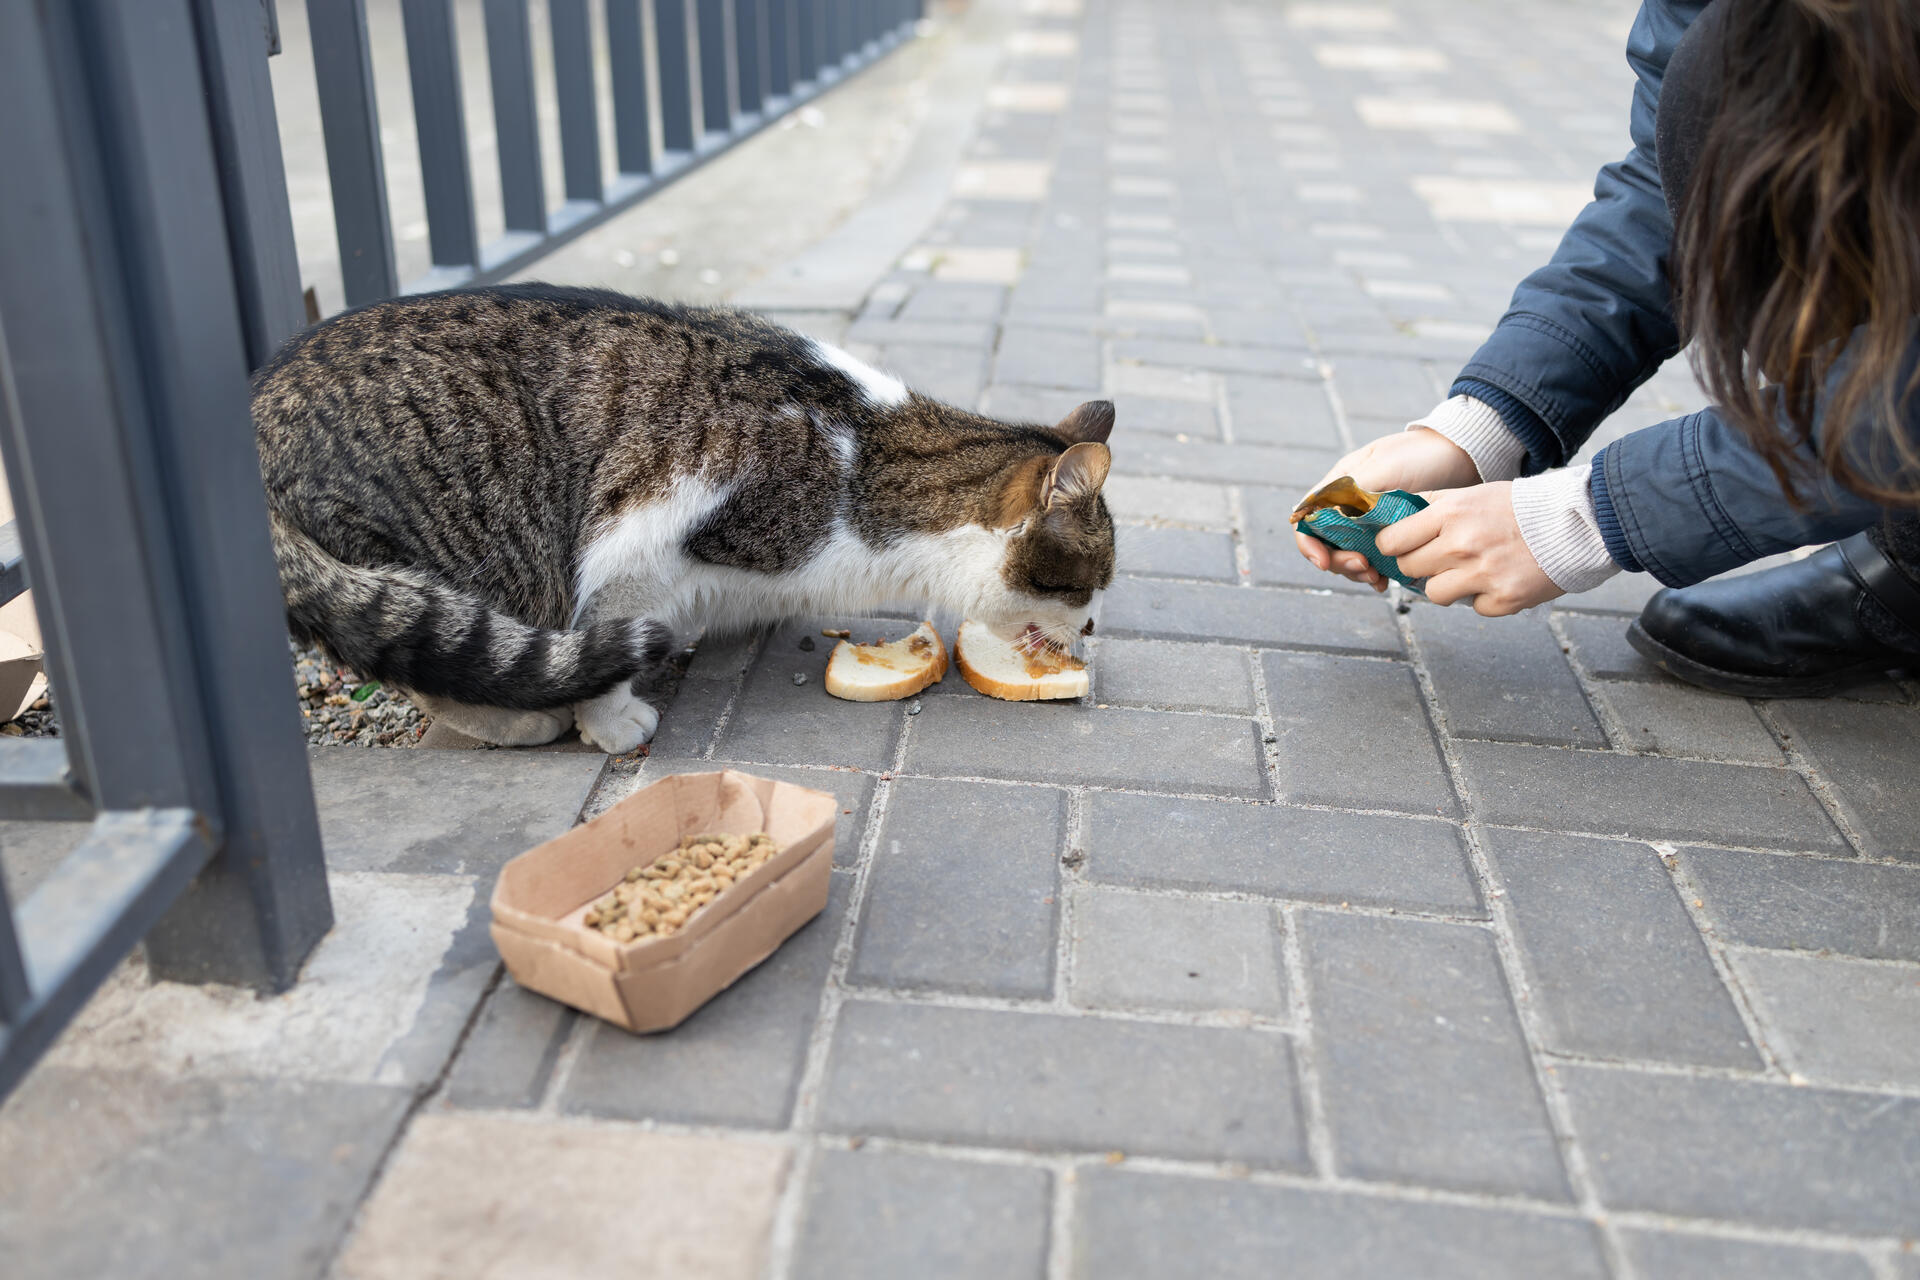 A cat getting fed by a stranger